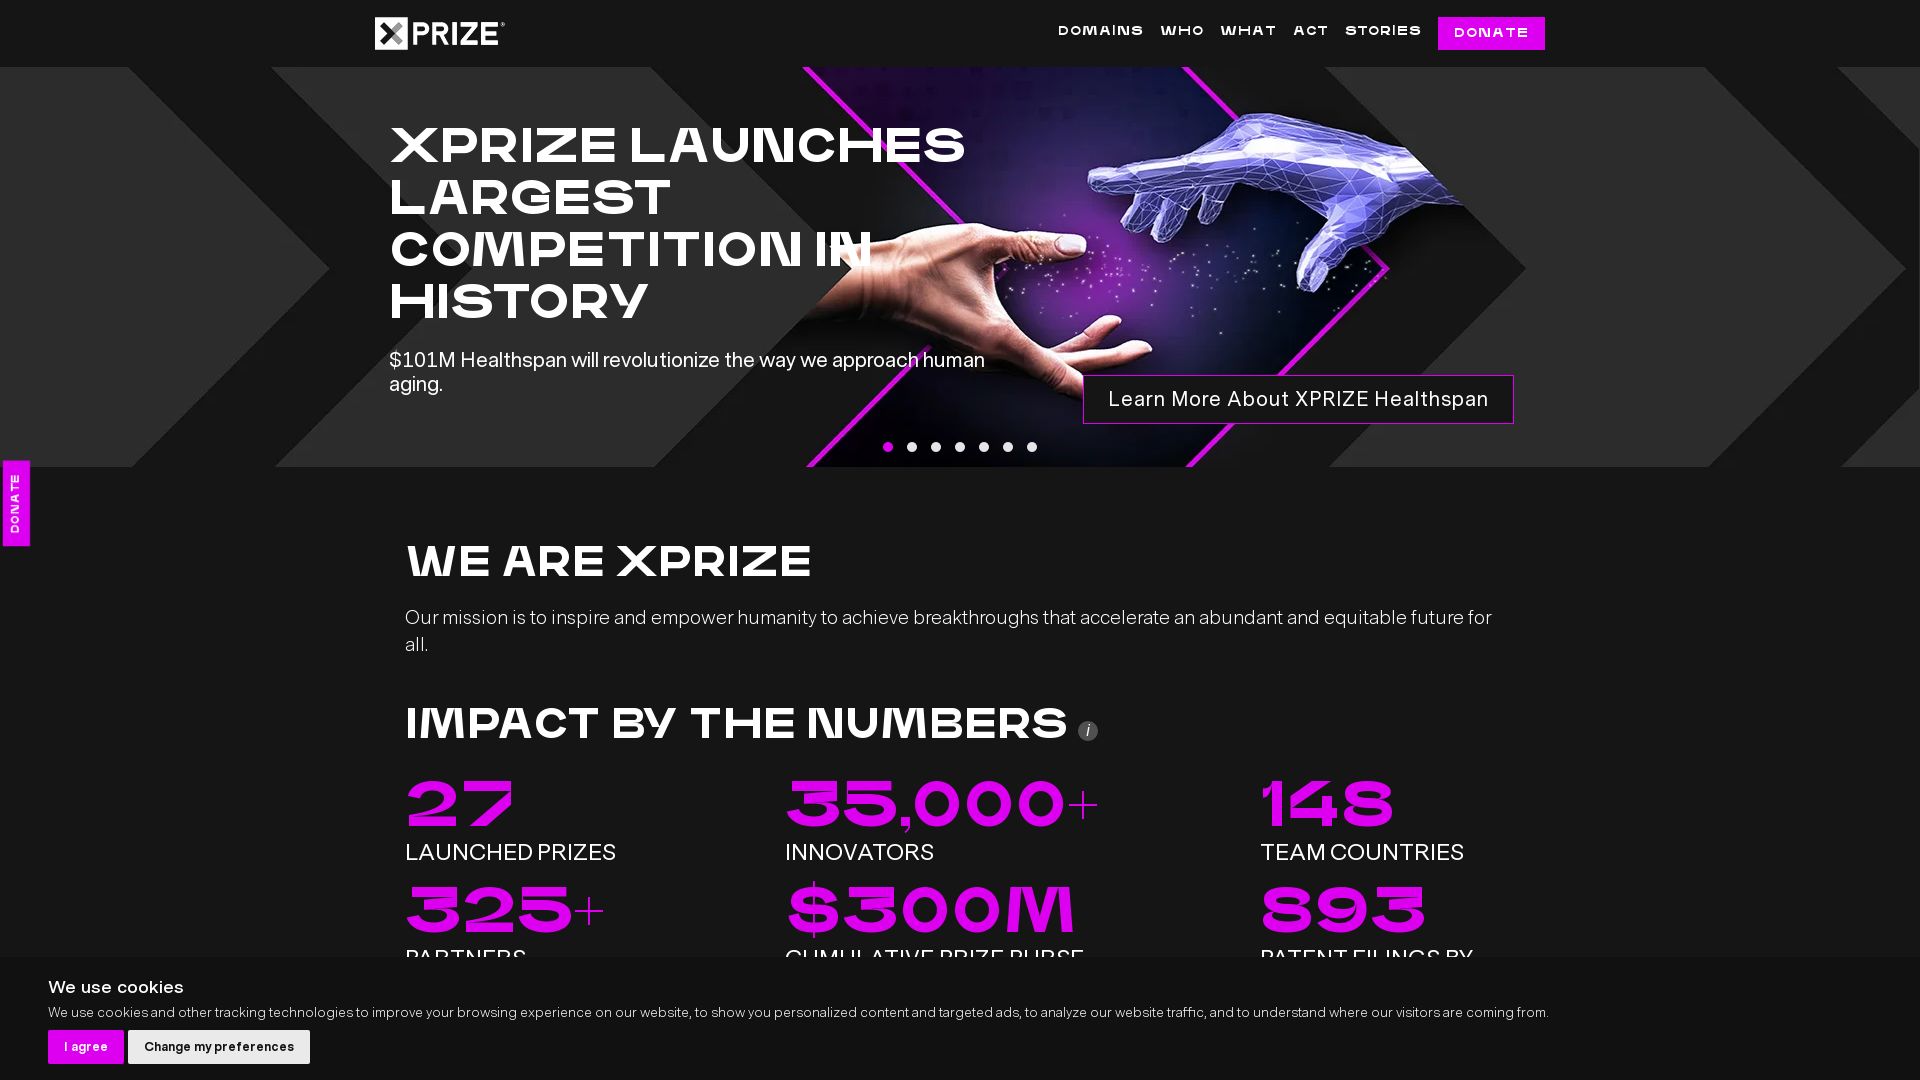 Website status xprize.org is   ONLINE